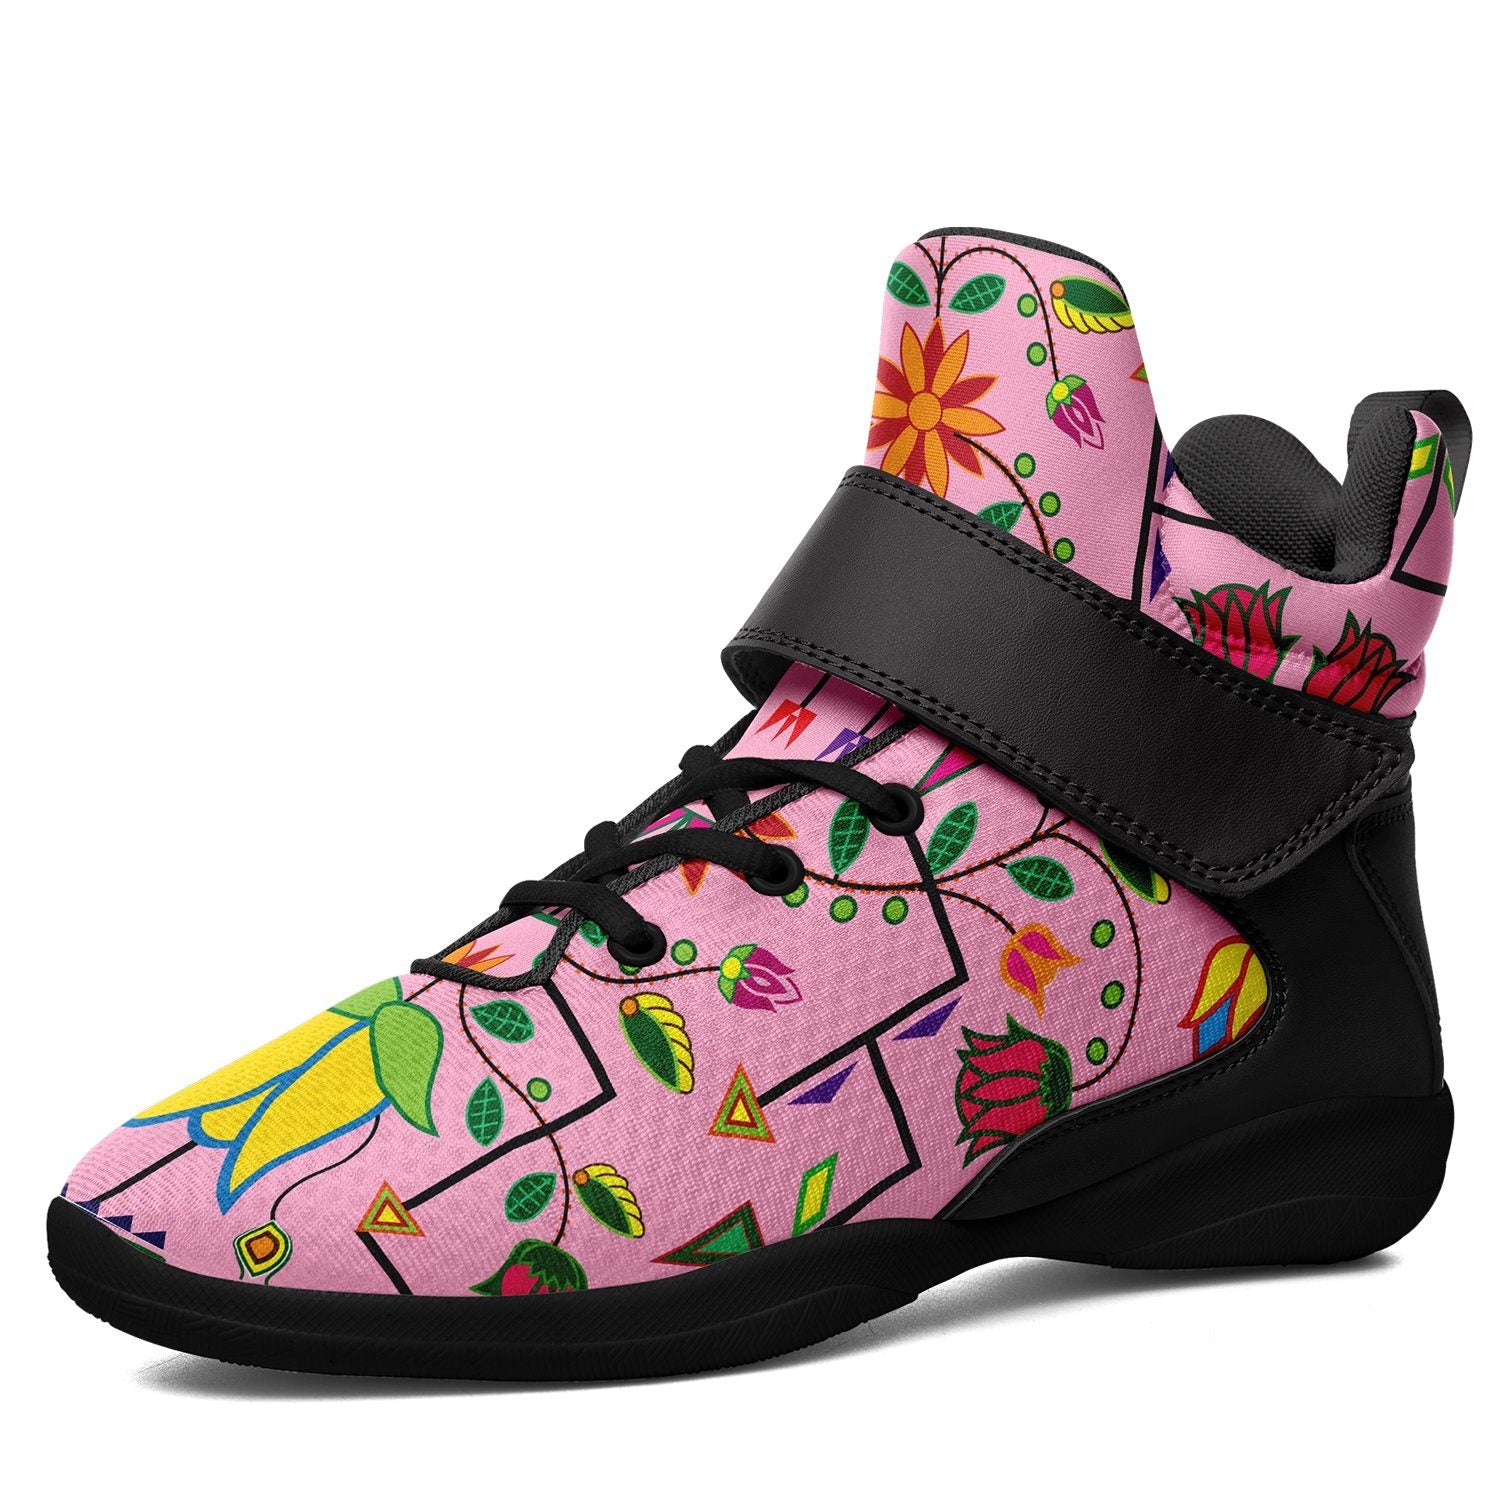 Geometric Floral Summer Sunset Kid's Ipottaa Basketball / Sport High Top Shoes 49 Dzine US Women 4.5 / US Youth 3.5 / EUR 35 Black Sole with Black Strap 